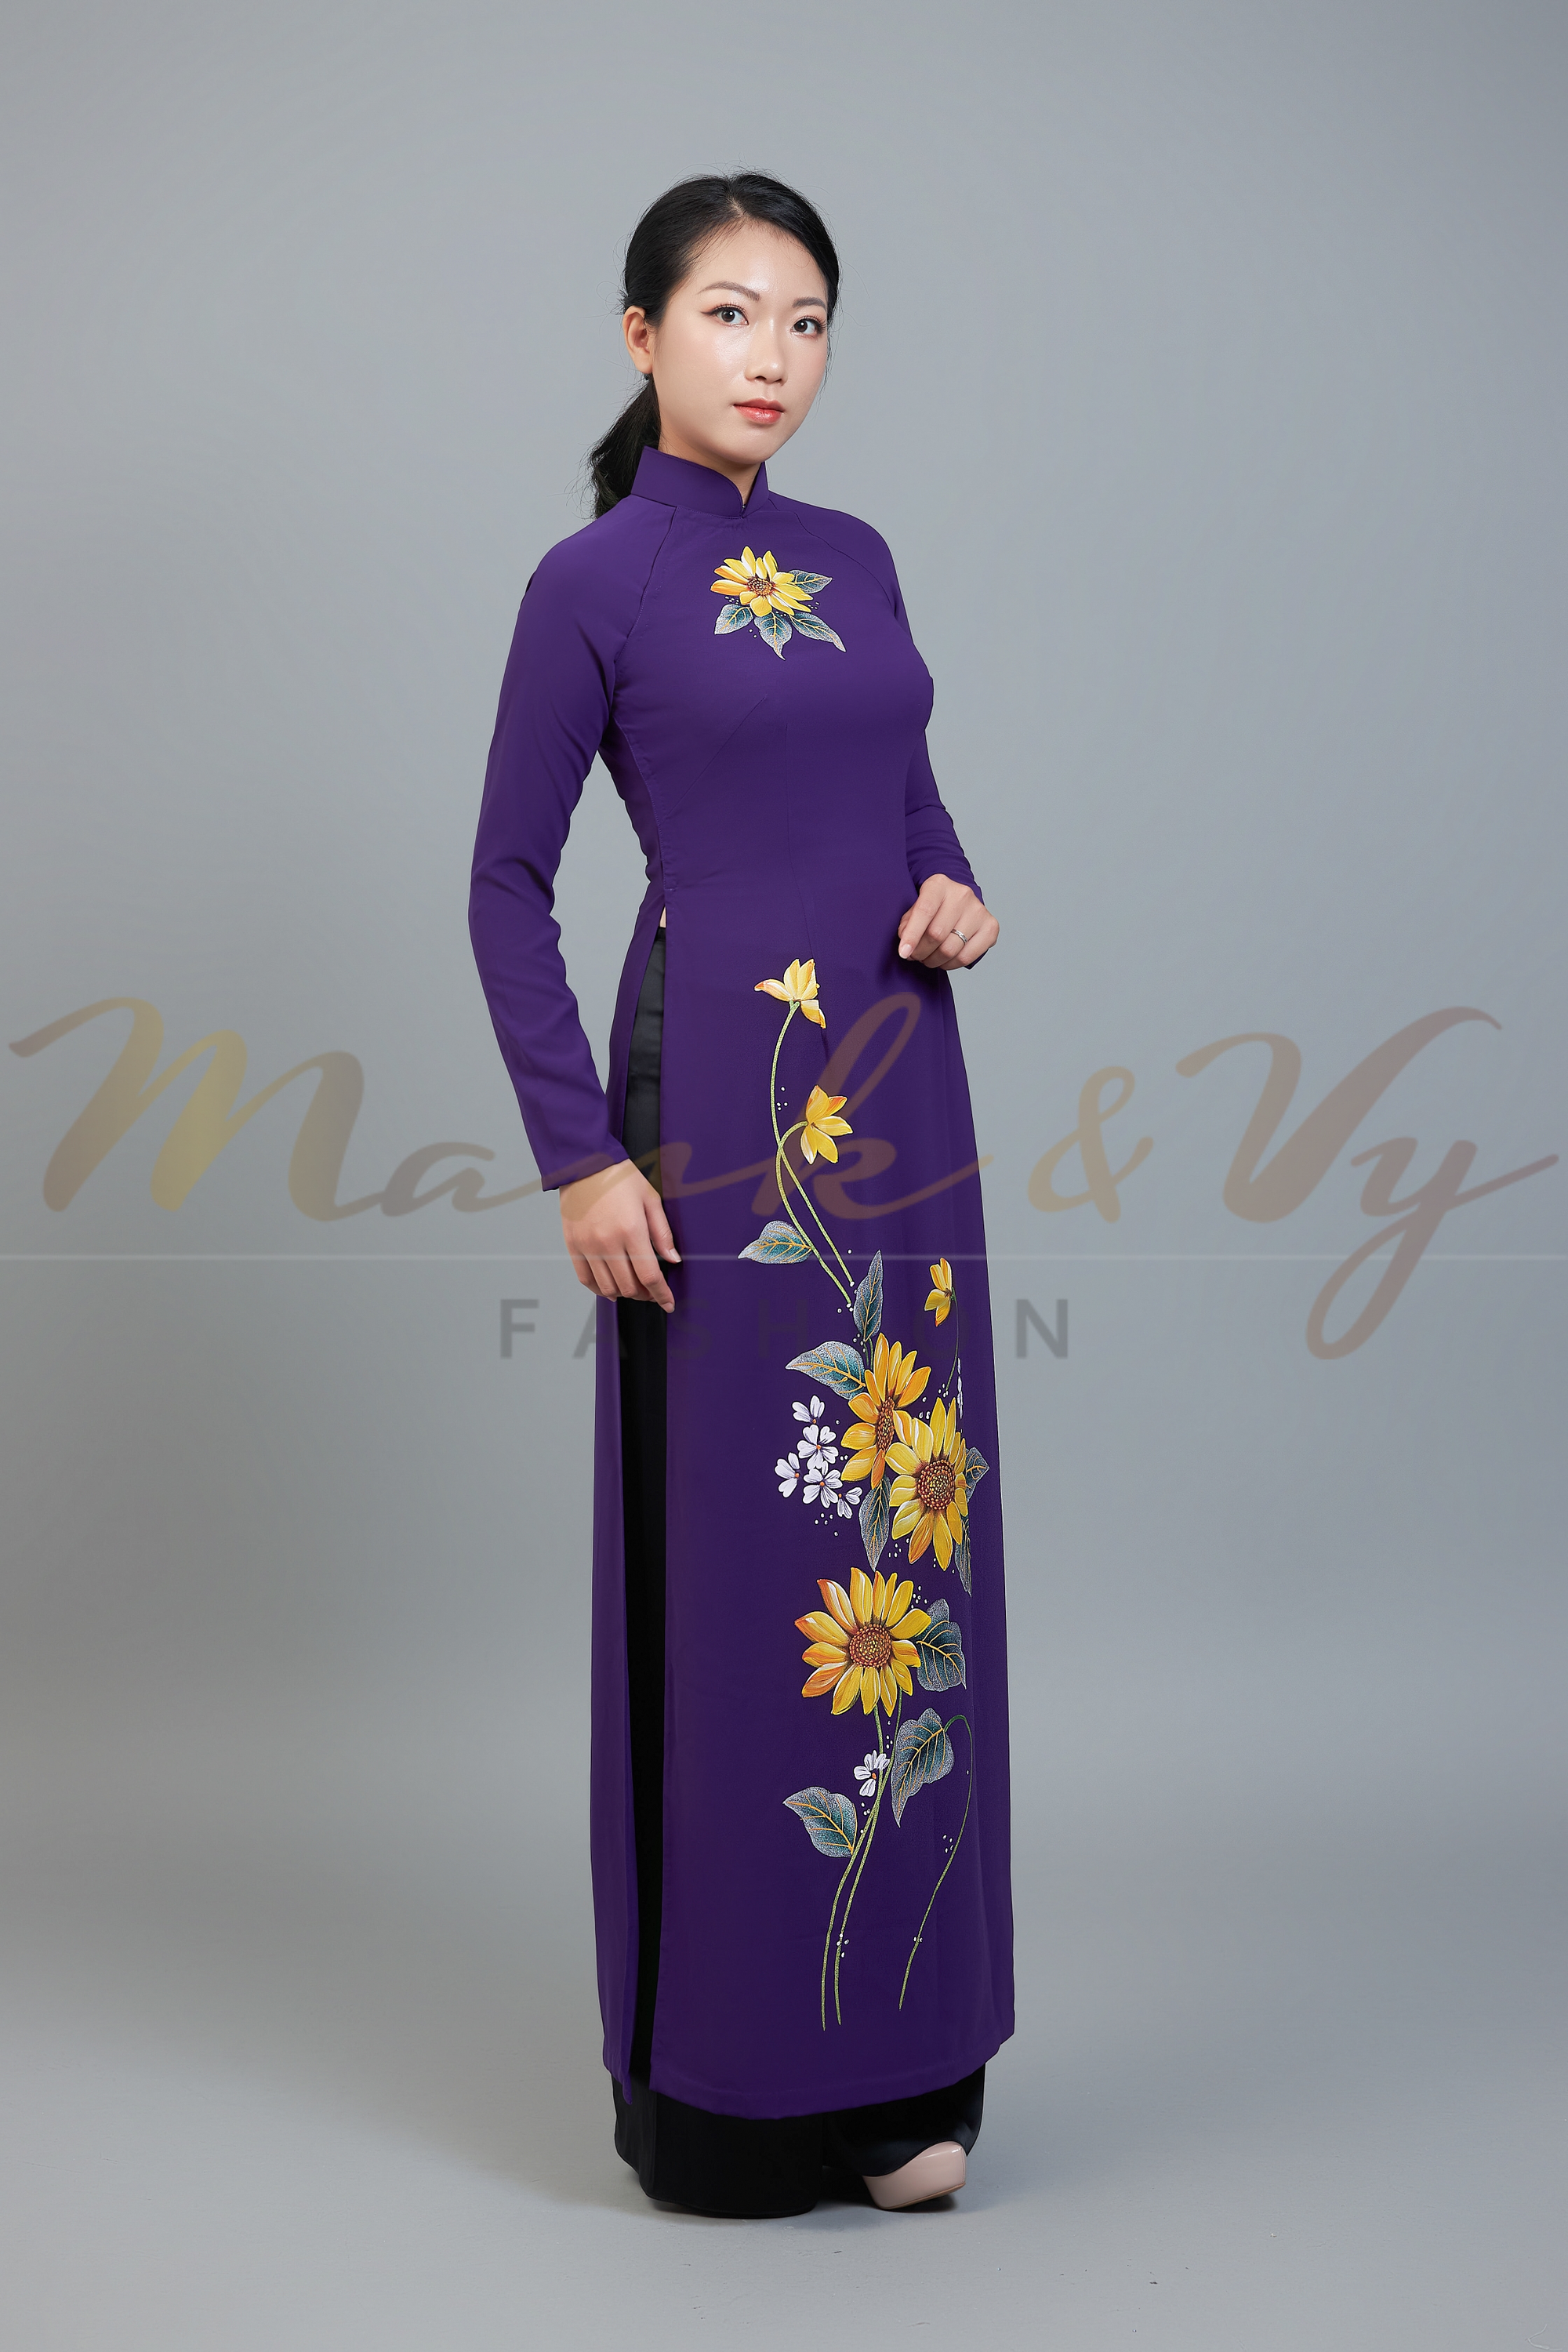 Custom made ao dai. Unique, hand-painted, floral motif on regal, purple fabric.